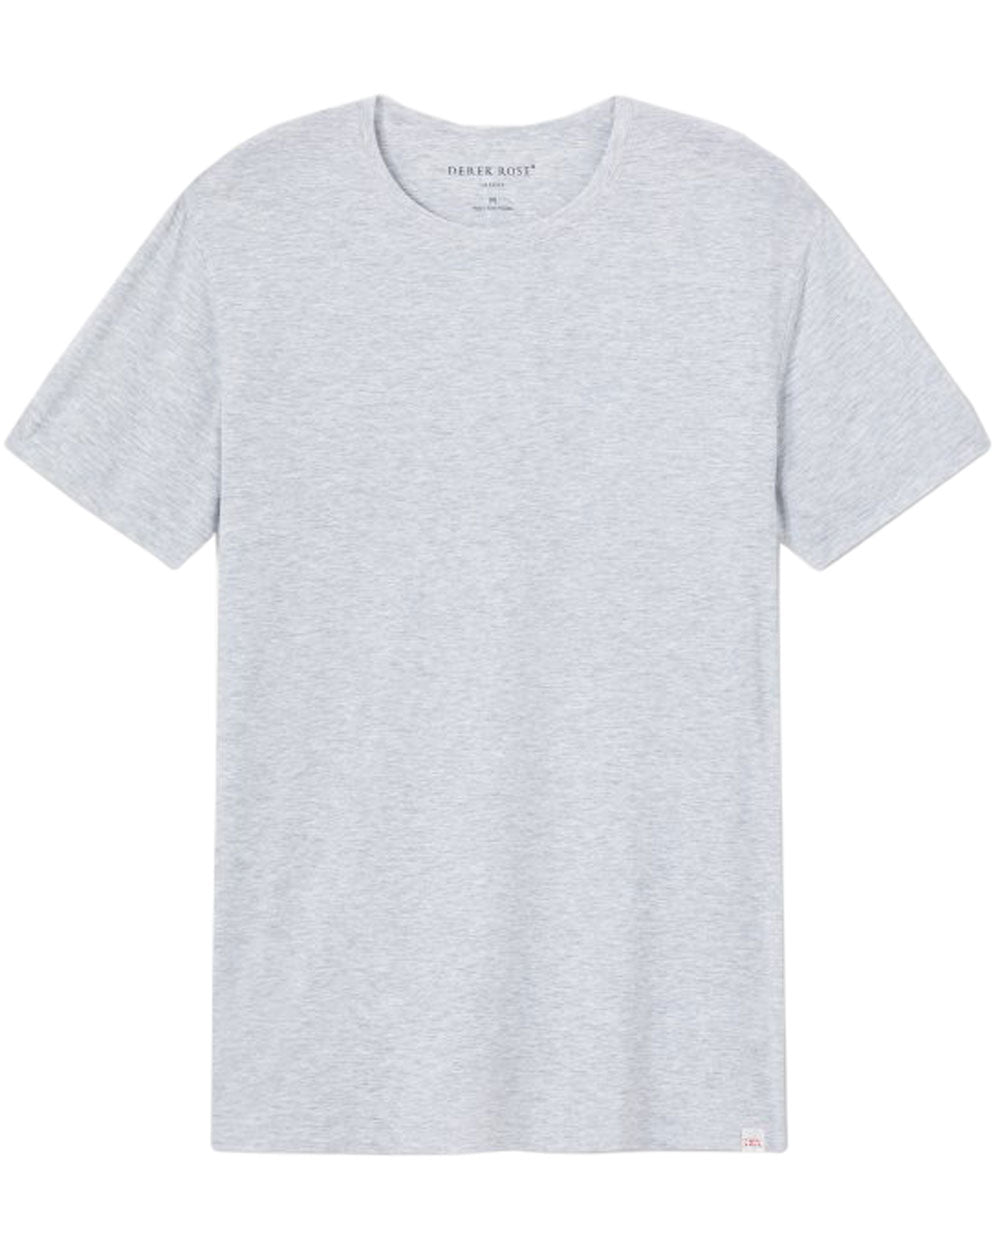 Ethan 1 Short Sleeve T-Shirt in Silver